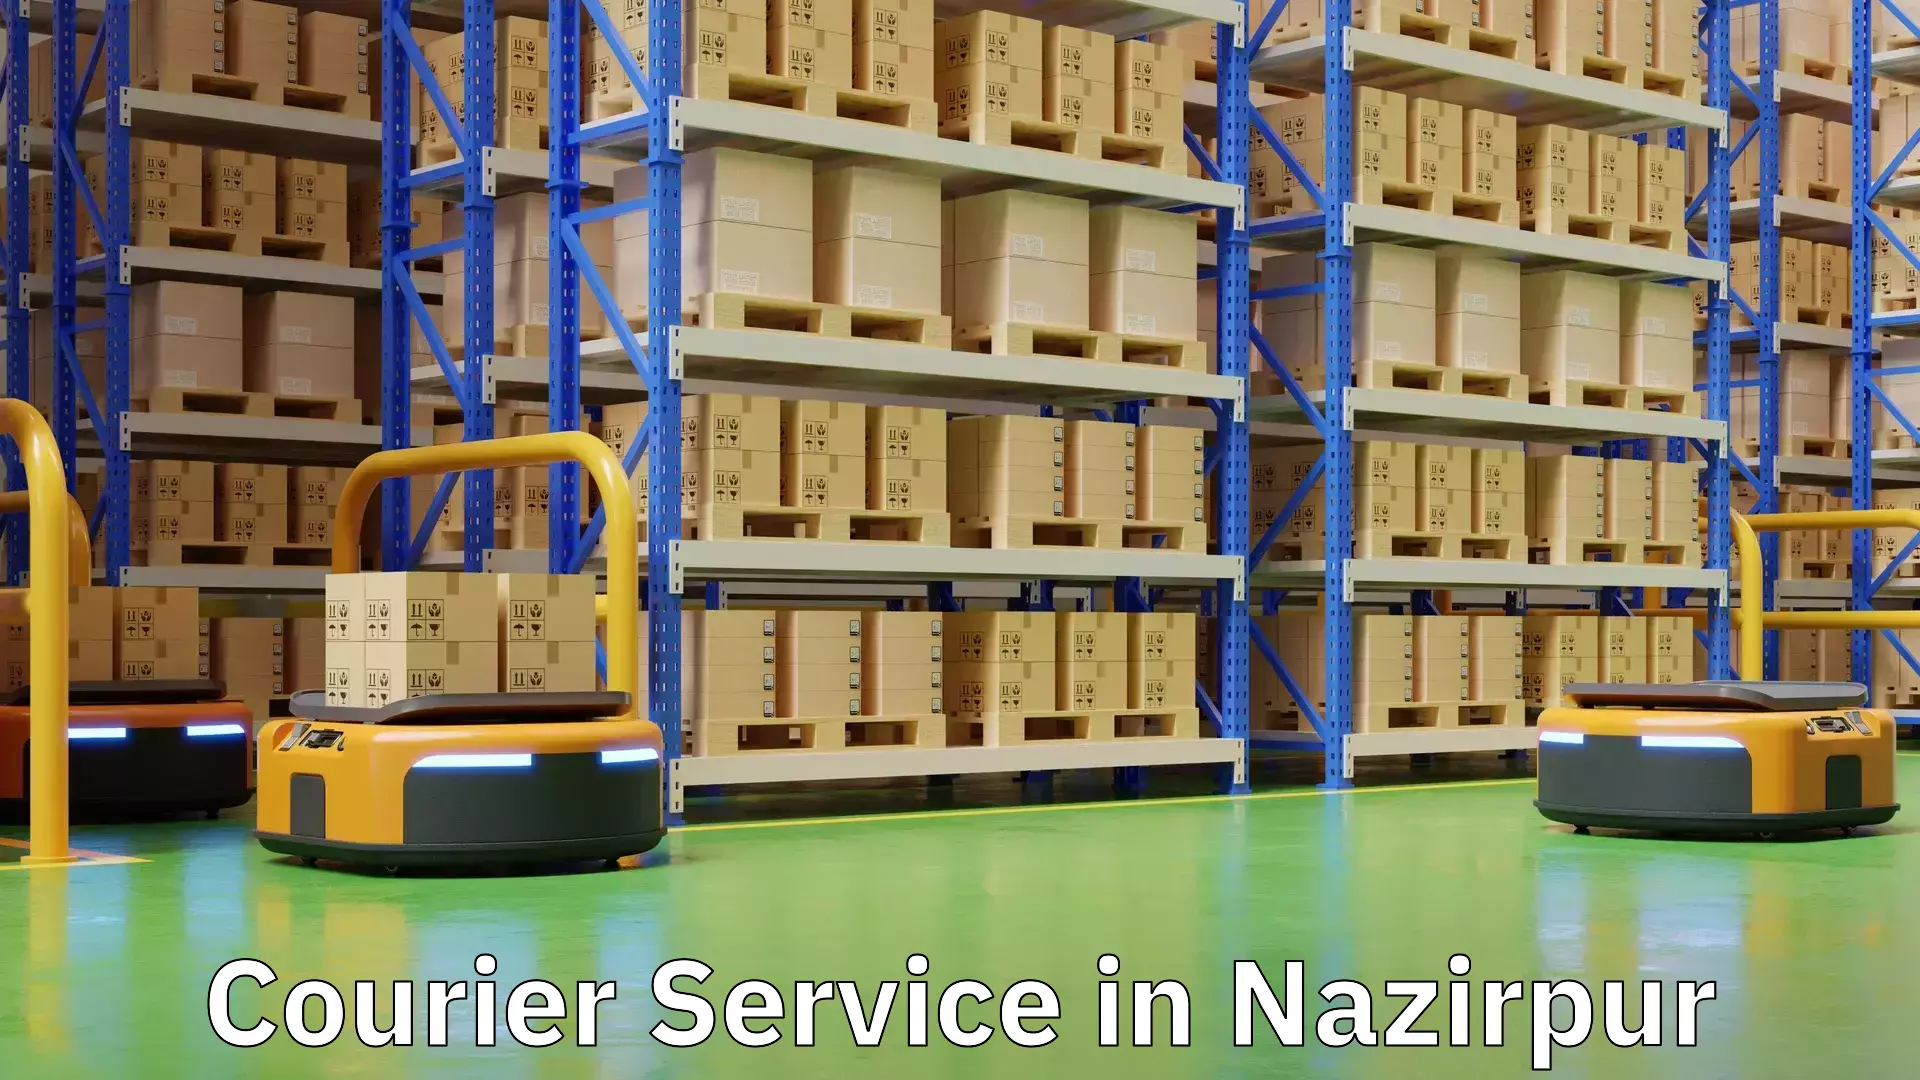 Full-service courier options in Nazirpur